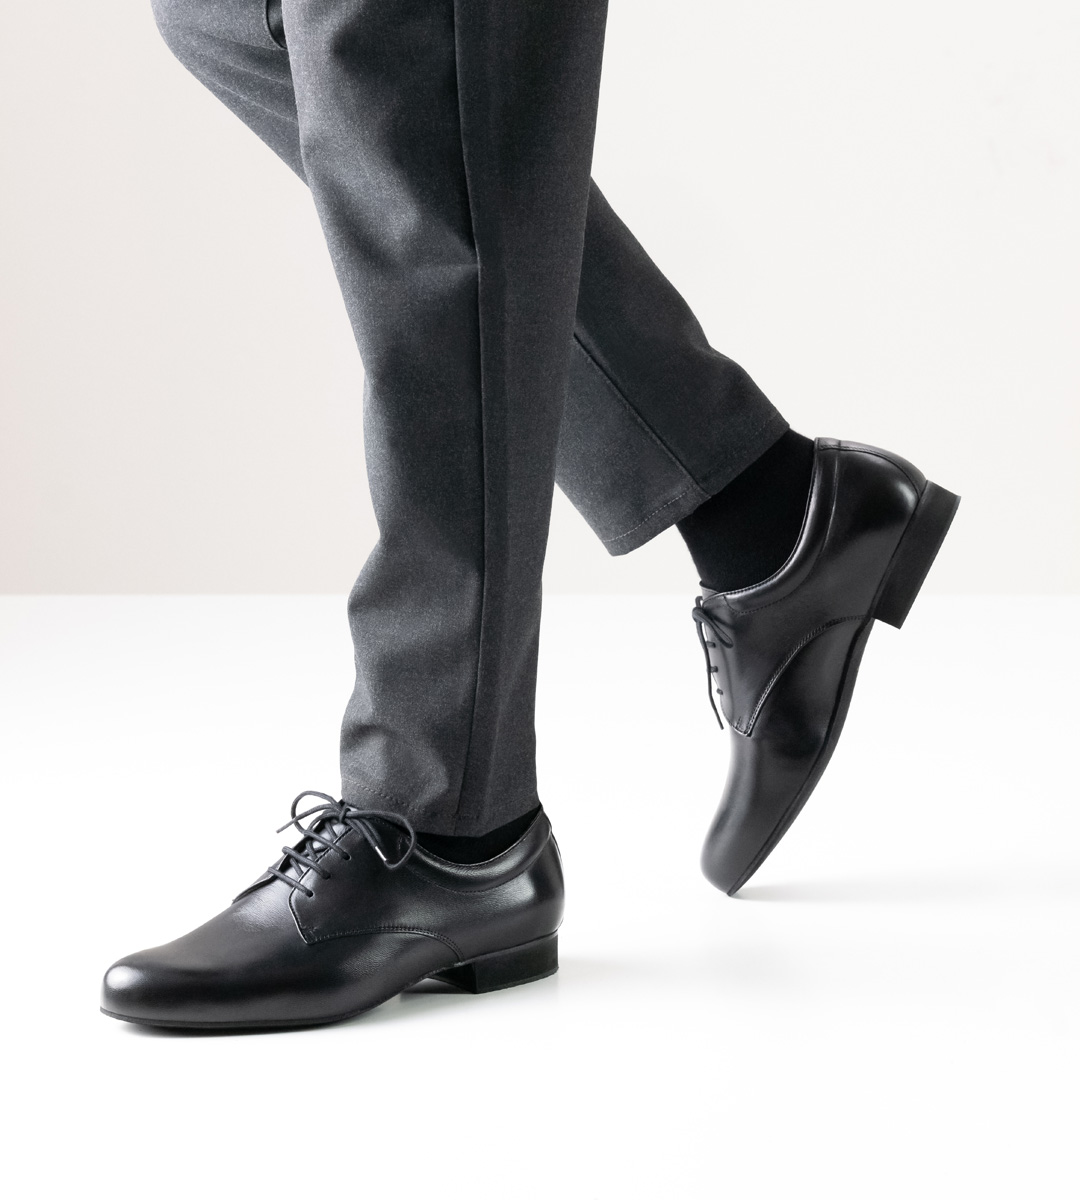 Men's dance shoe for wide feet by Werner Kern for loose insoles